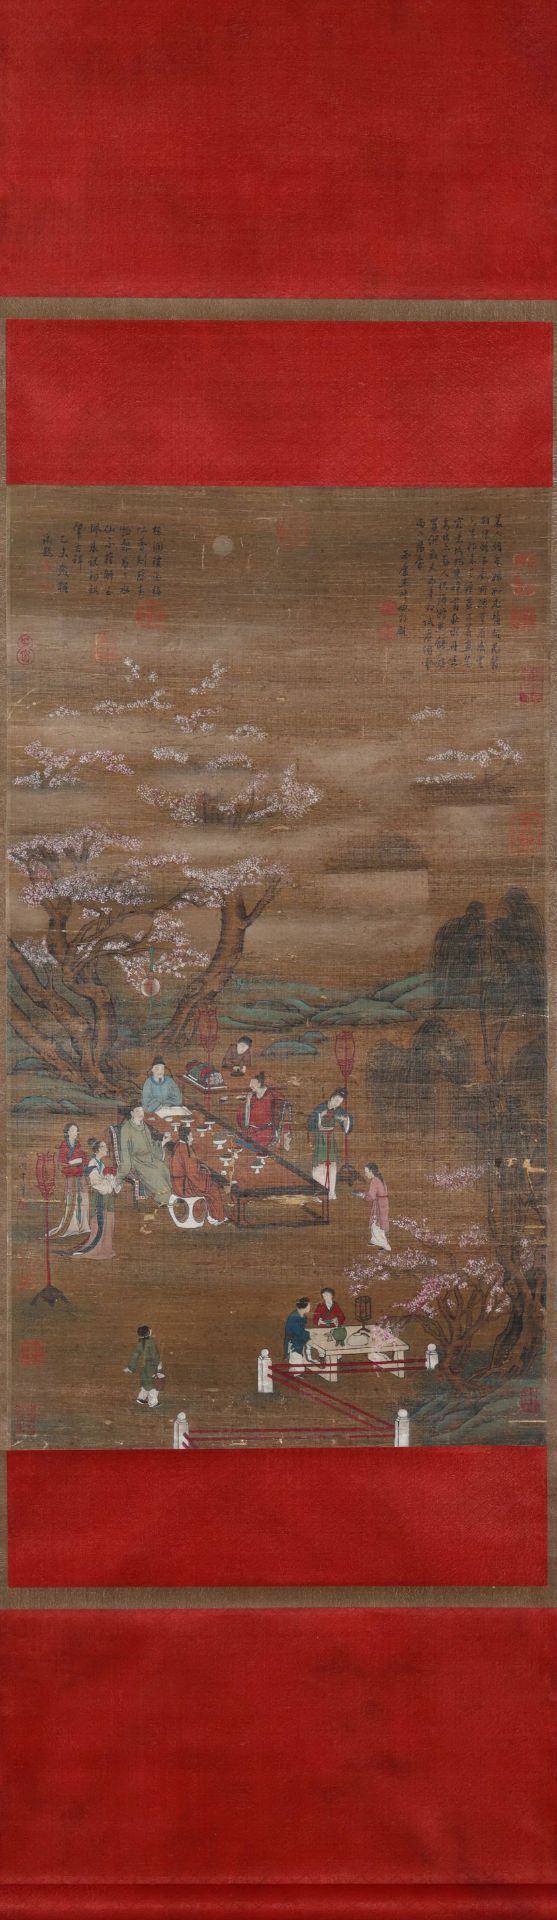 A Chinese Scroll Painting By Gu Hongzhong - Image 10 of 10